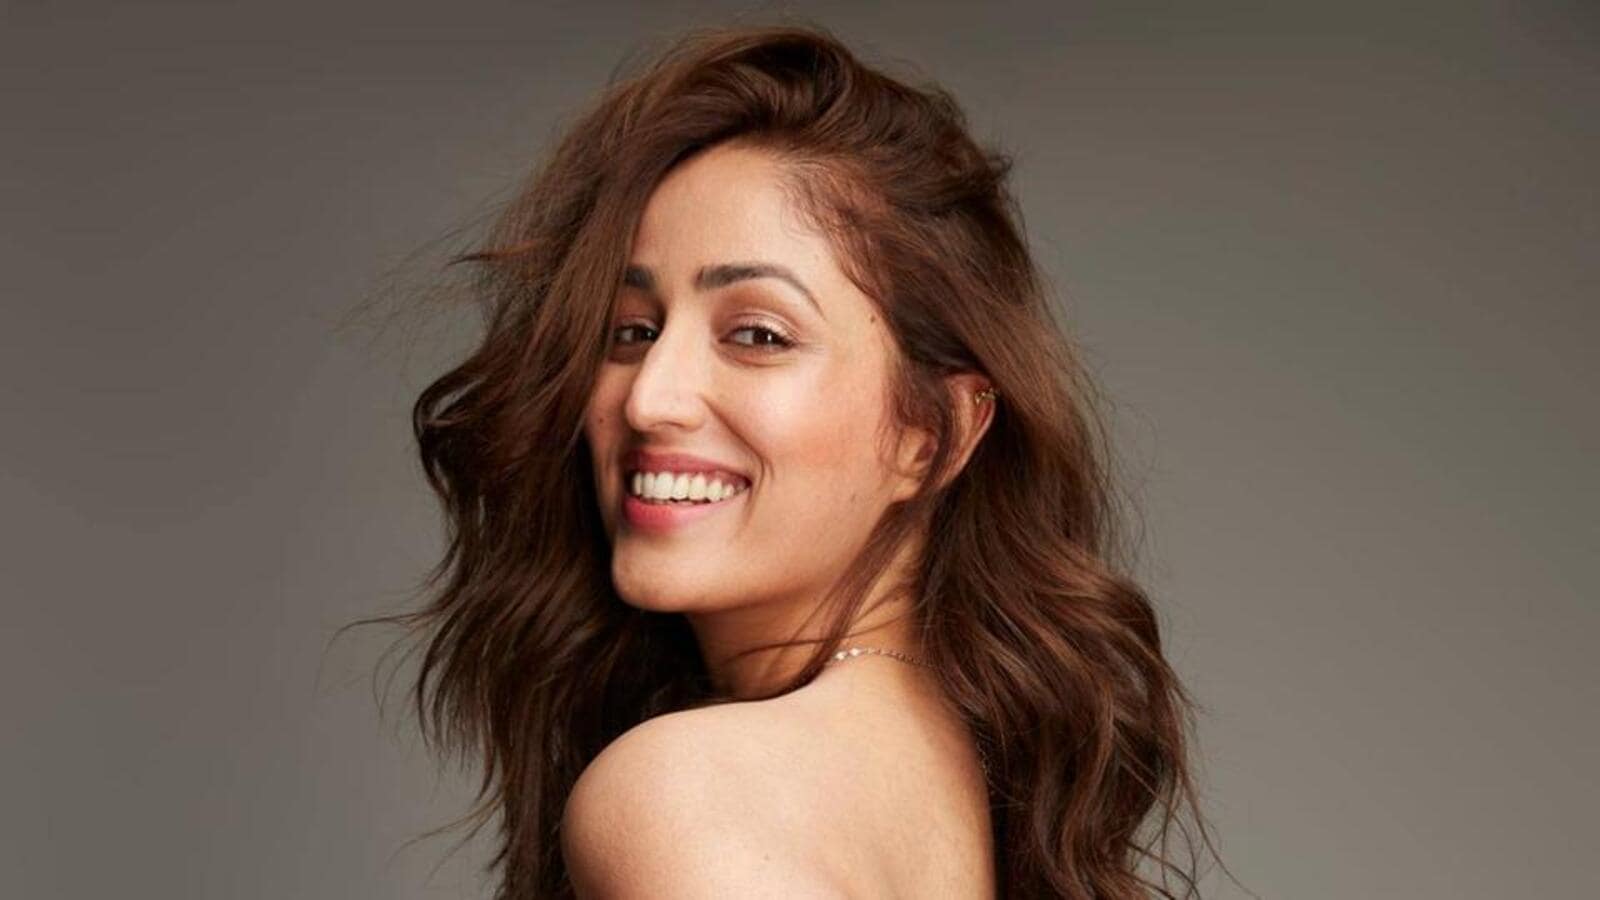 Yami Gautam I did some films where my heart didnt belong, but I will respect it as it was work Bollywood